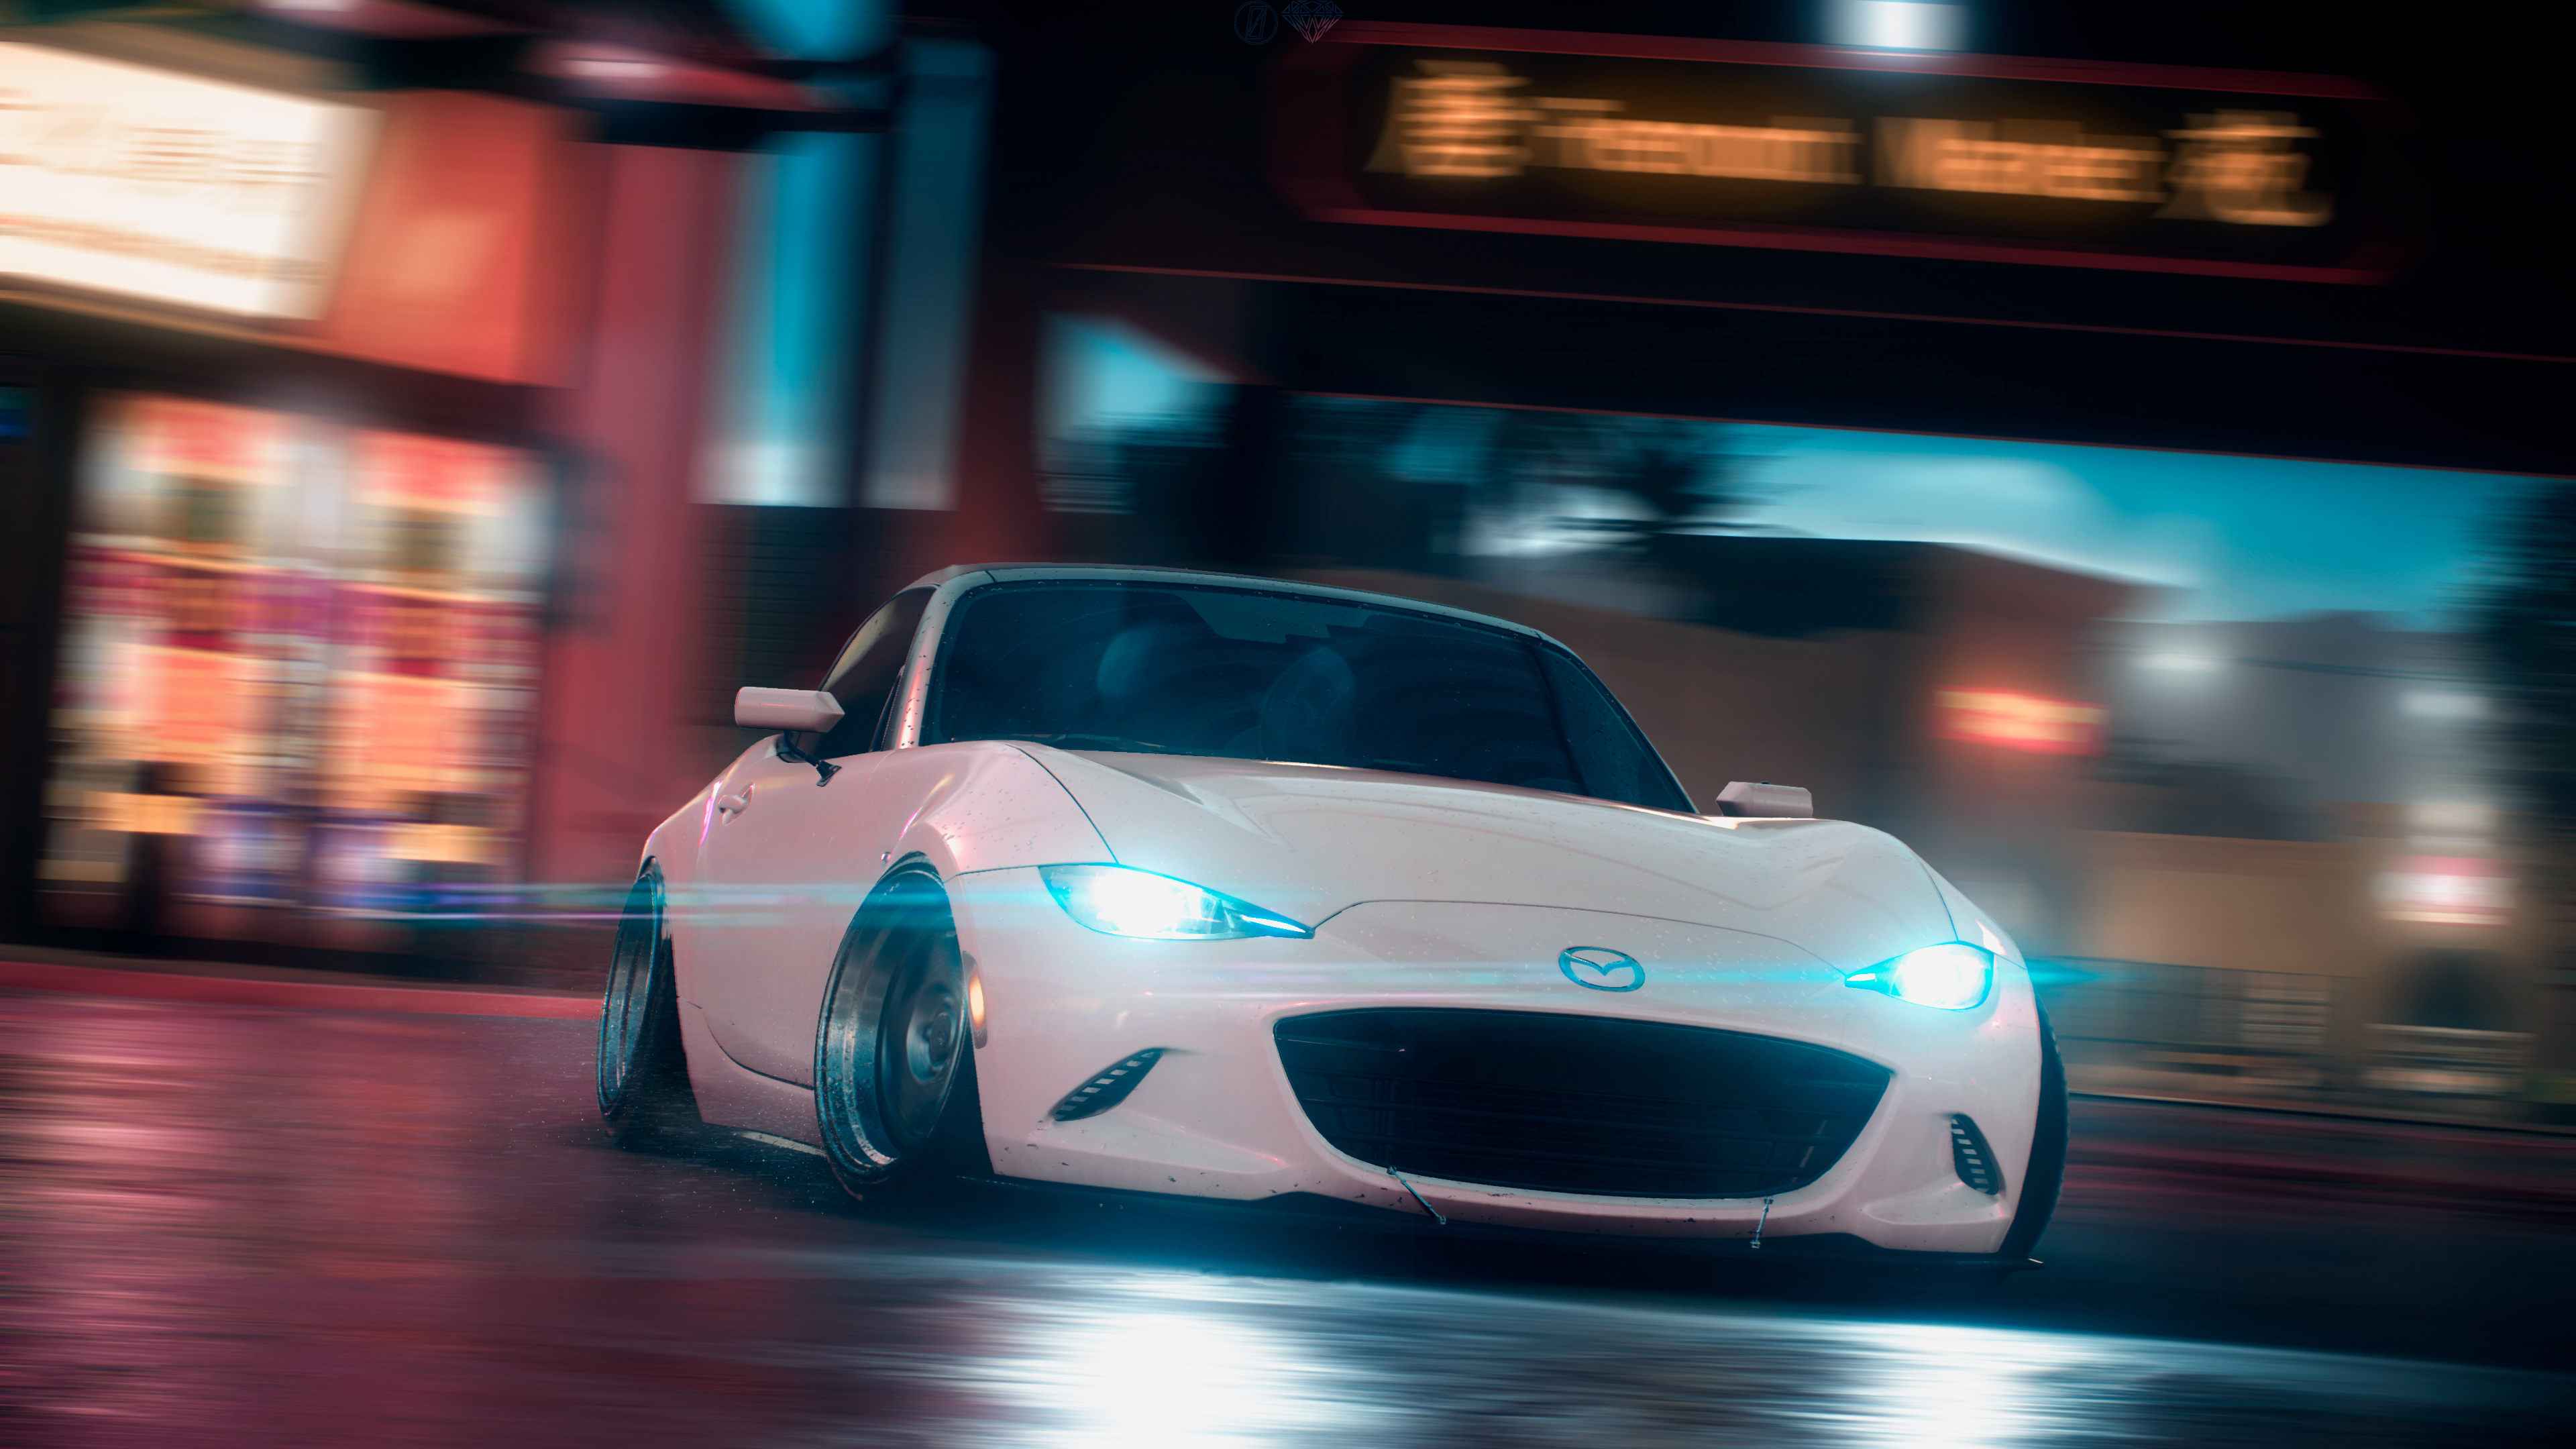 Wallpapers Mazda Need for Speed games on the desktop